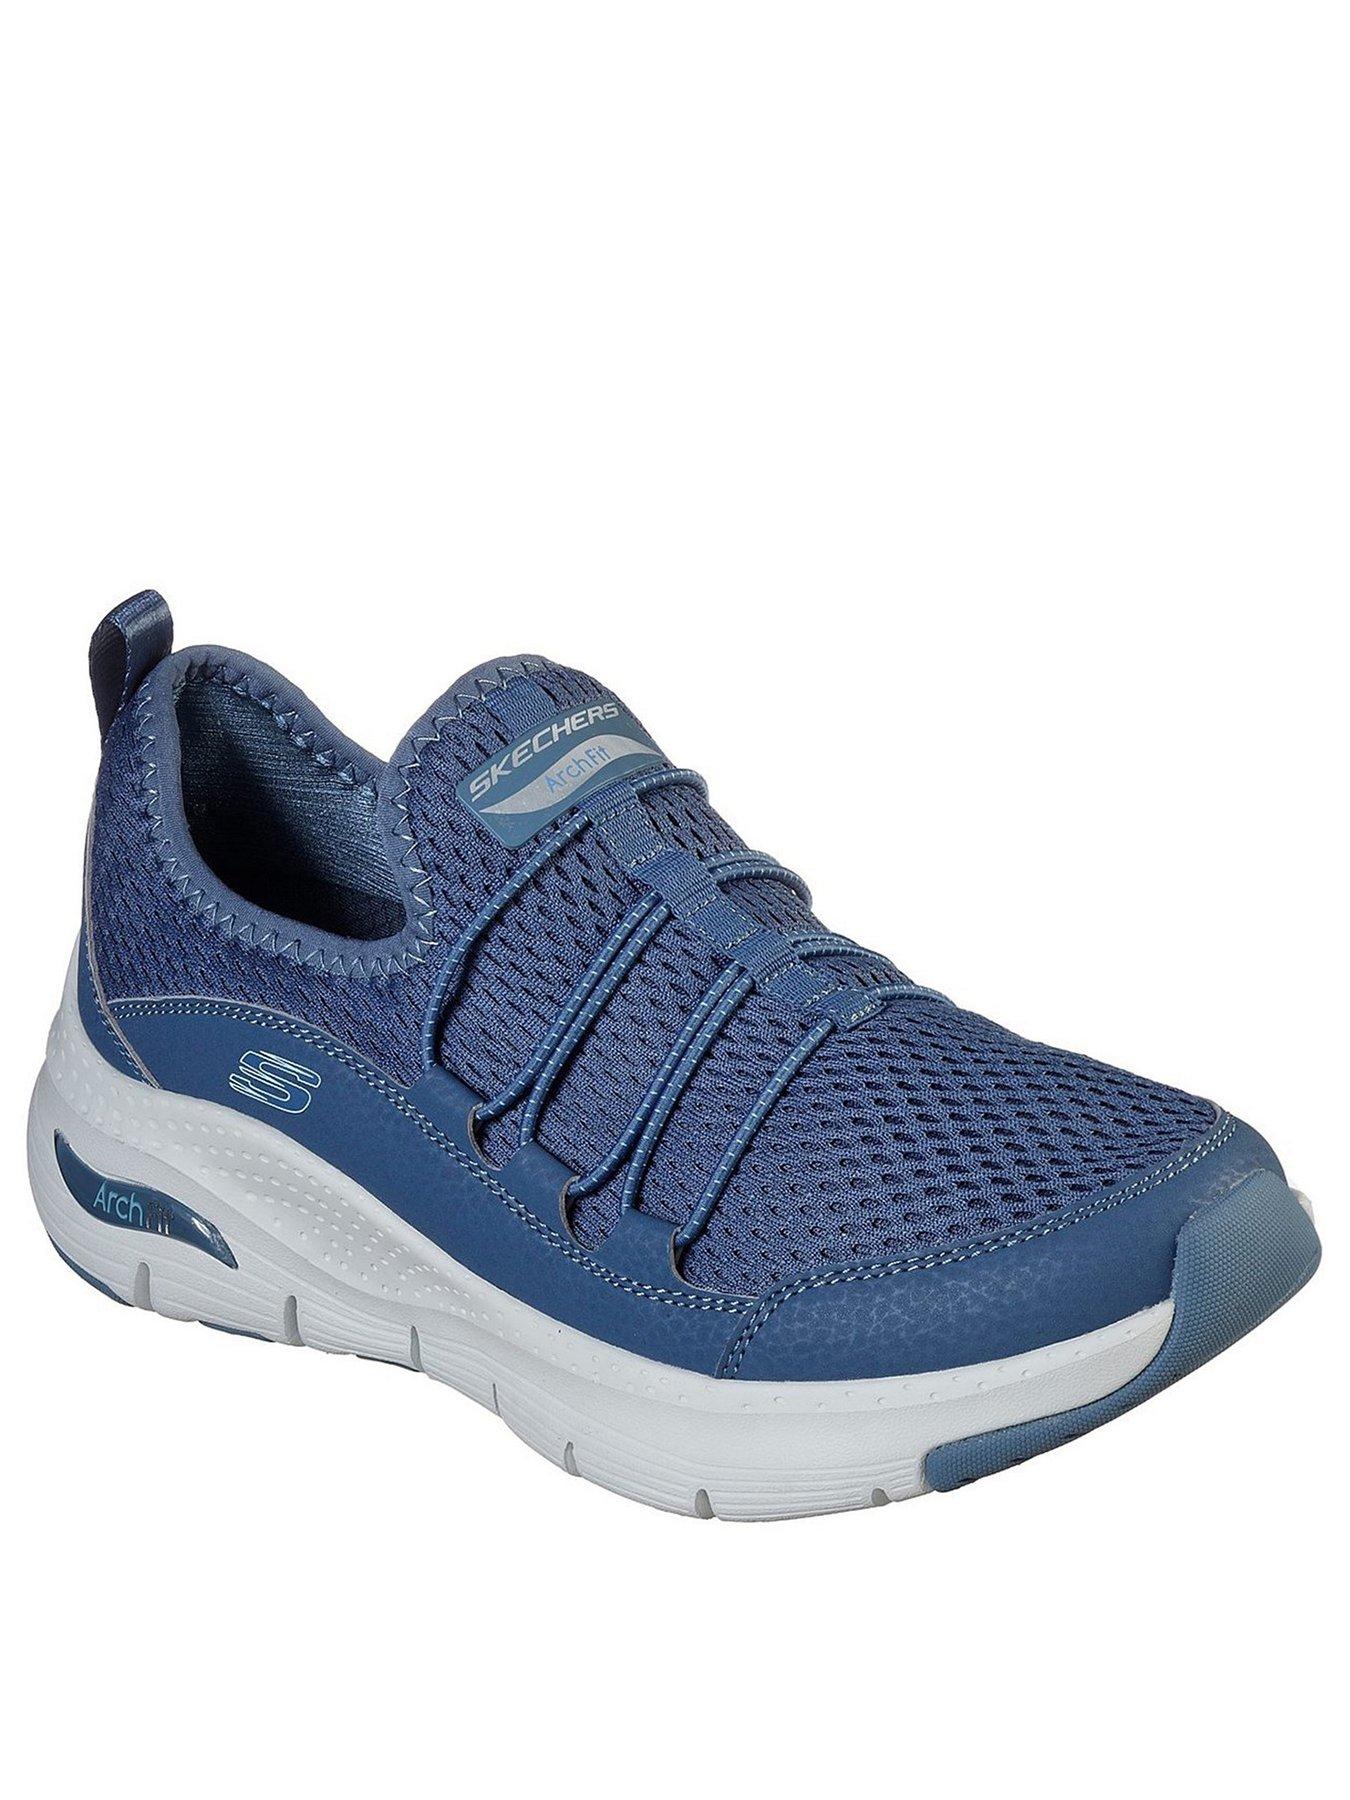 Skechers Arch Fit Trainer - Navy 